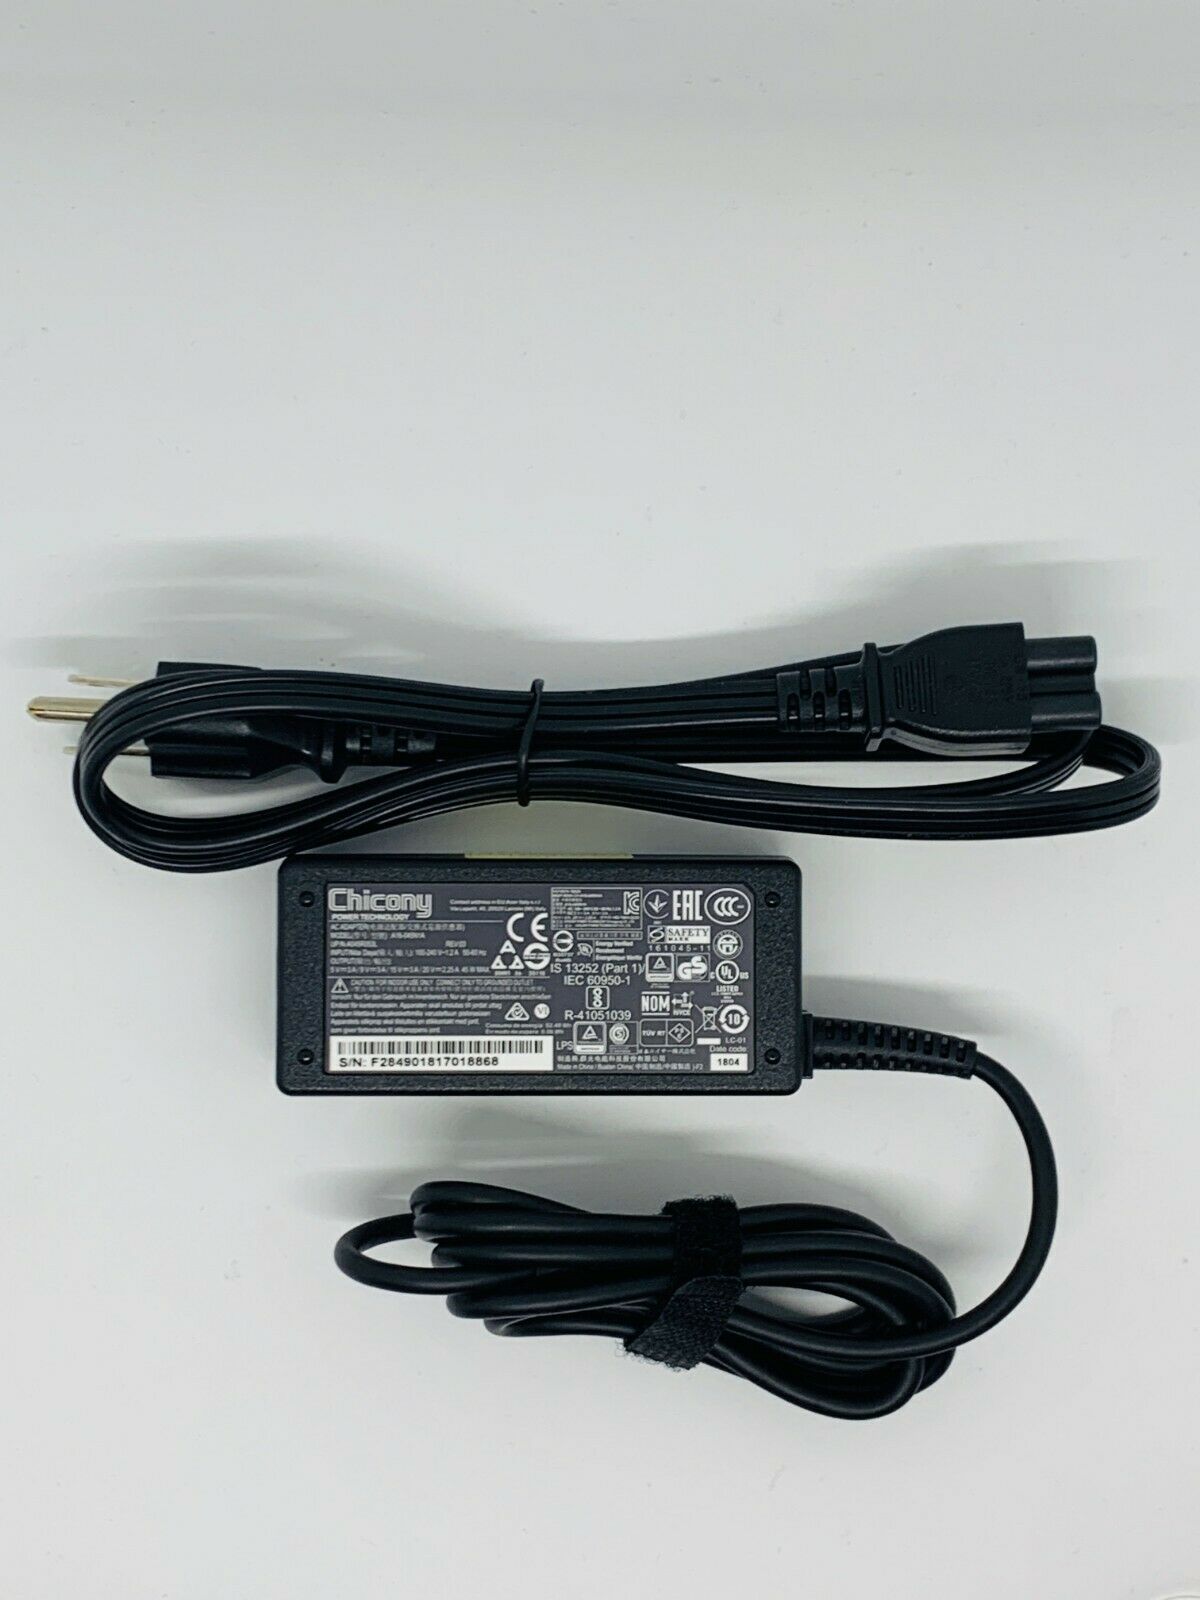 Chicony A16-045N1A 45W Type-C AC Power Adapter Charger for Acer mpn2: A16-045N1A, kp0450h009, AK.045AP.080, NP.ADT0A.